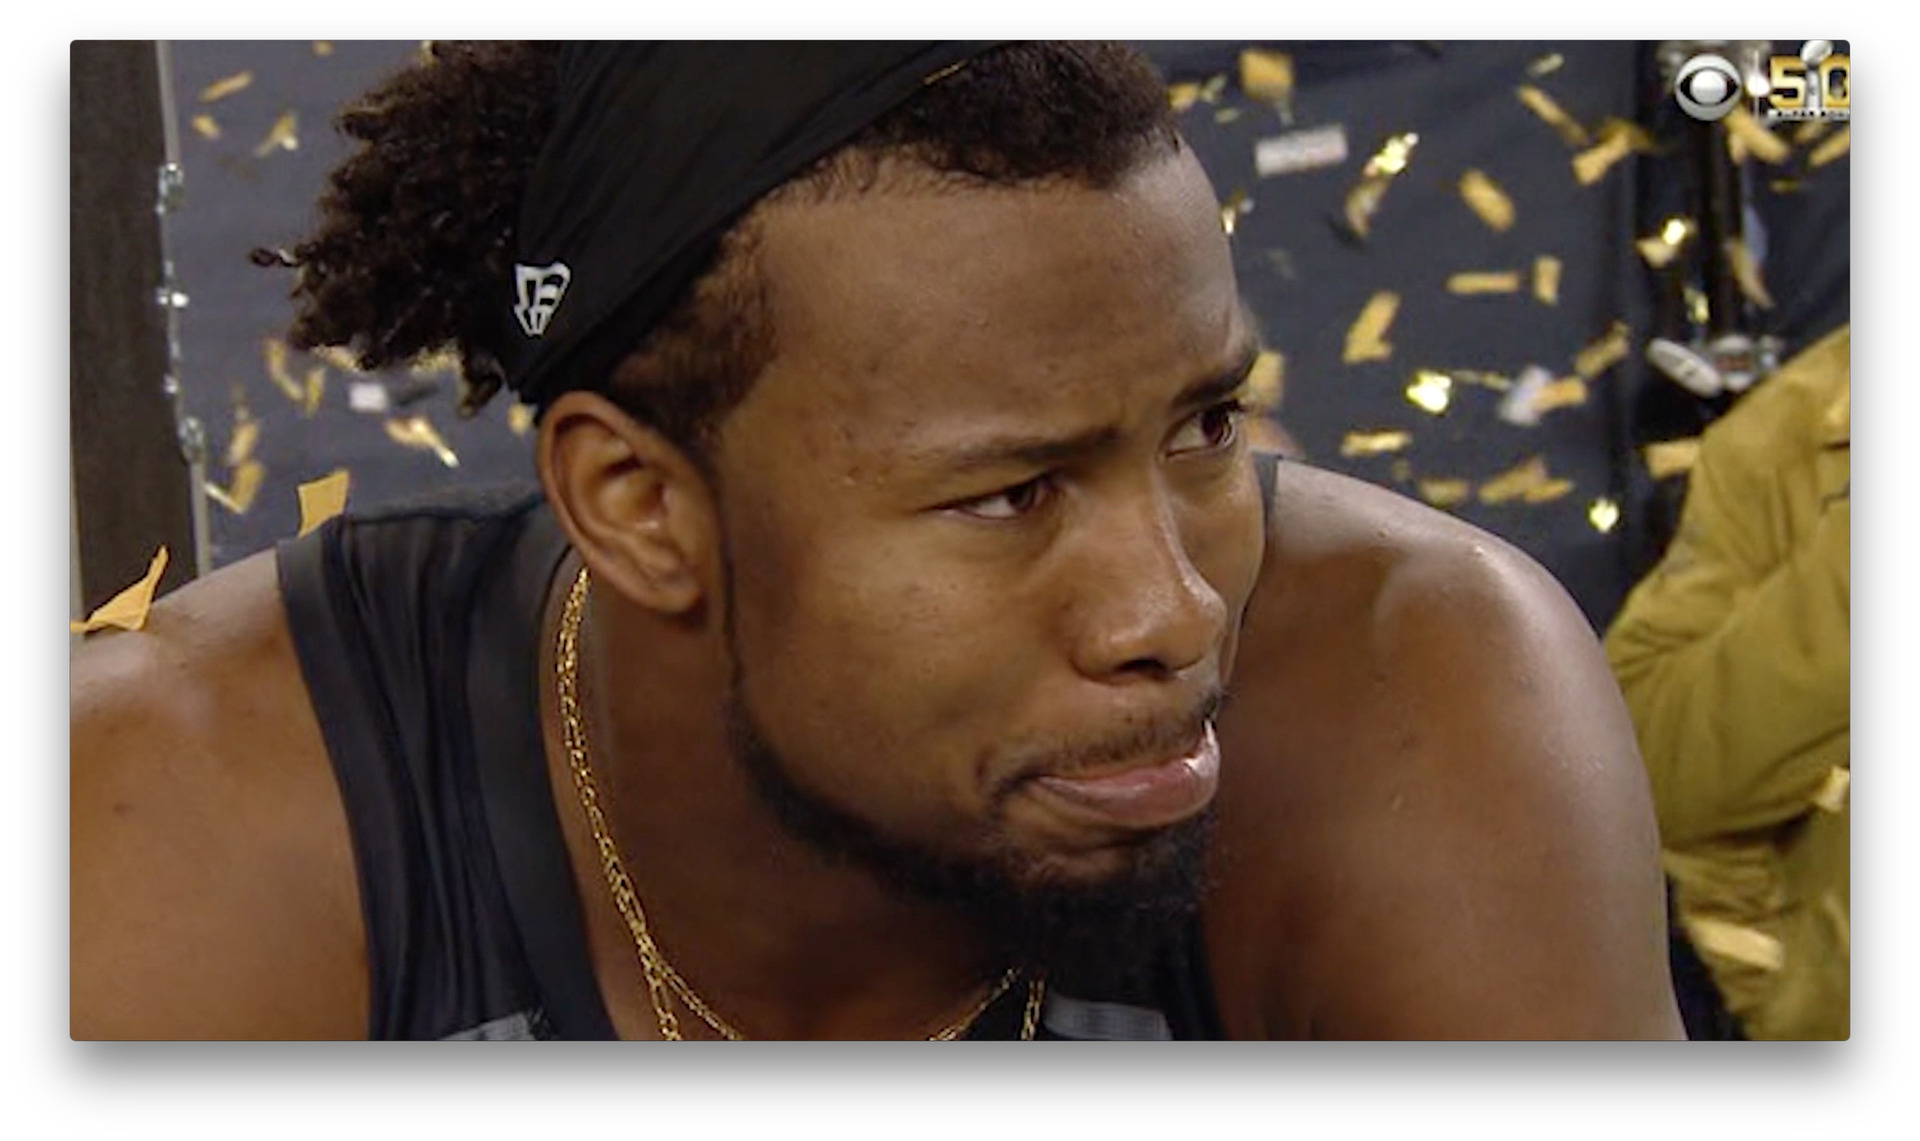 Josh Norman in tears after losing Super Bowl 50